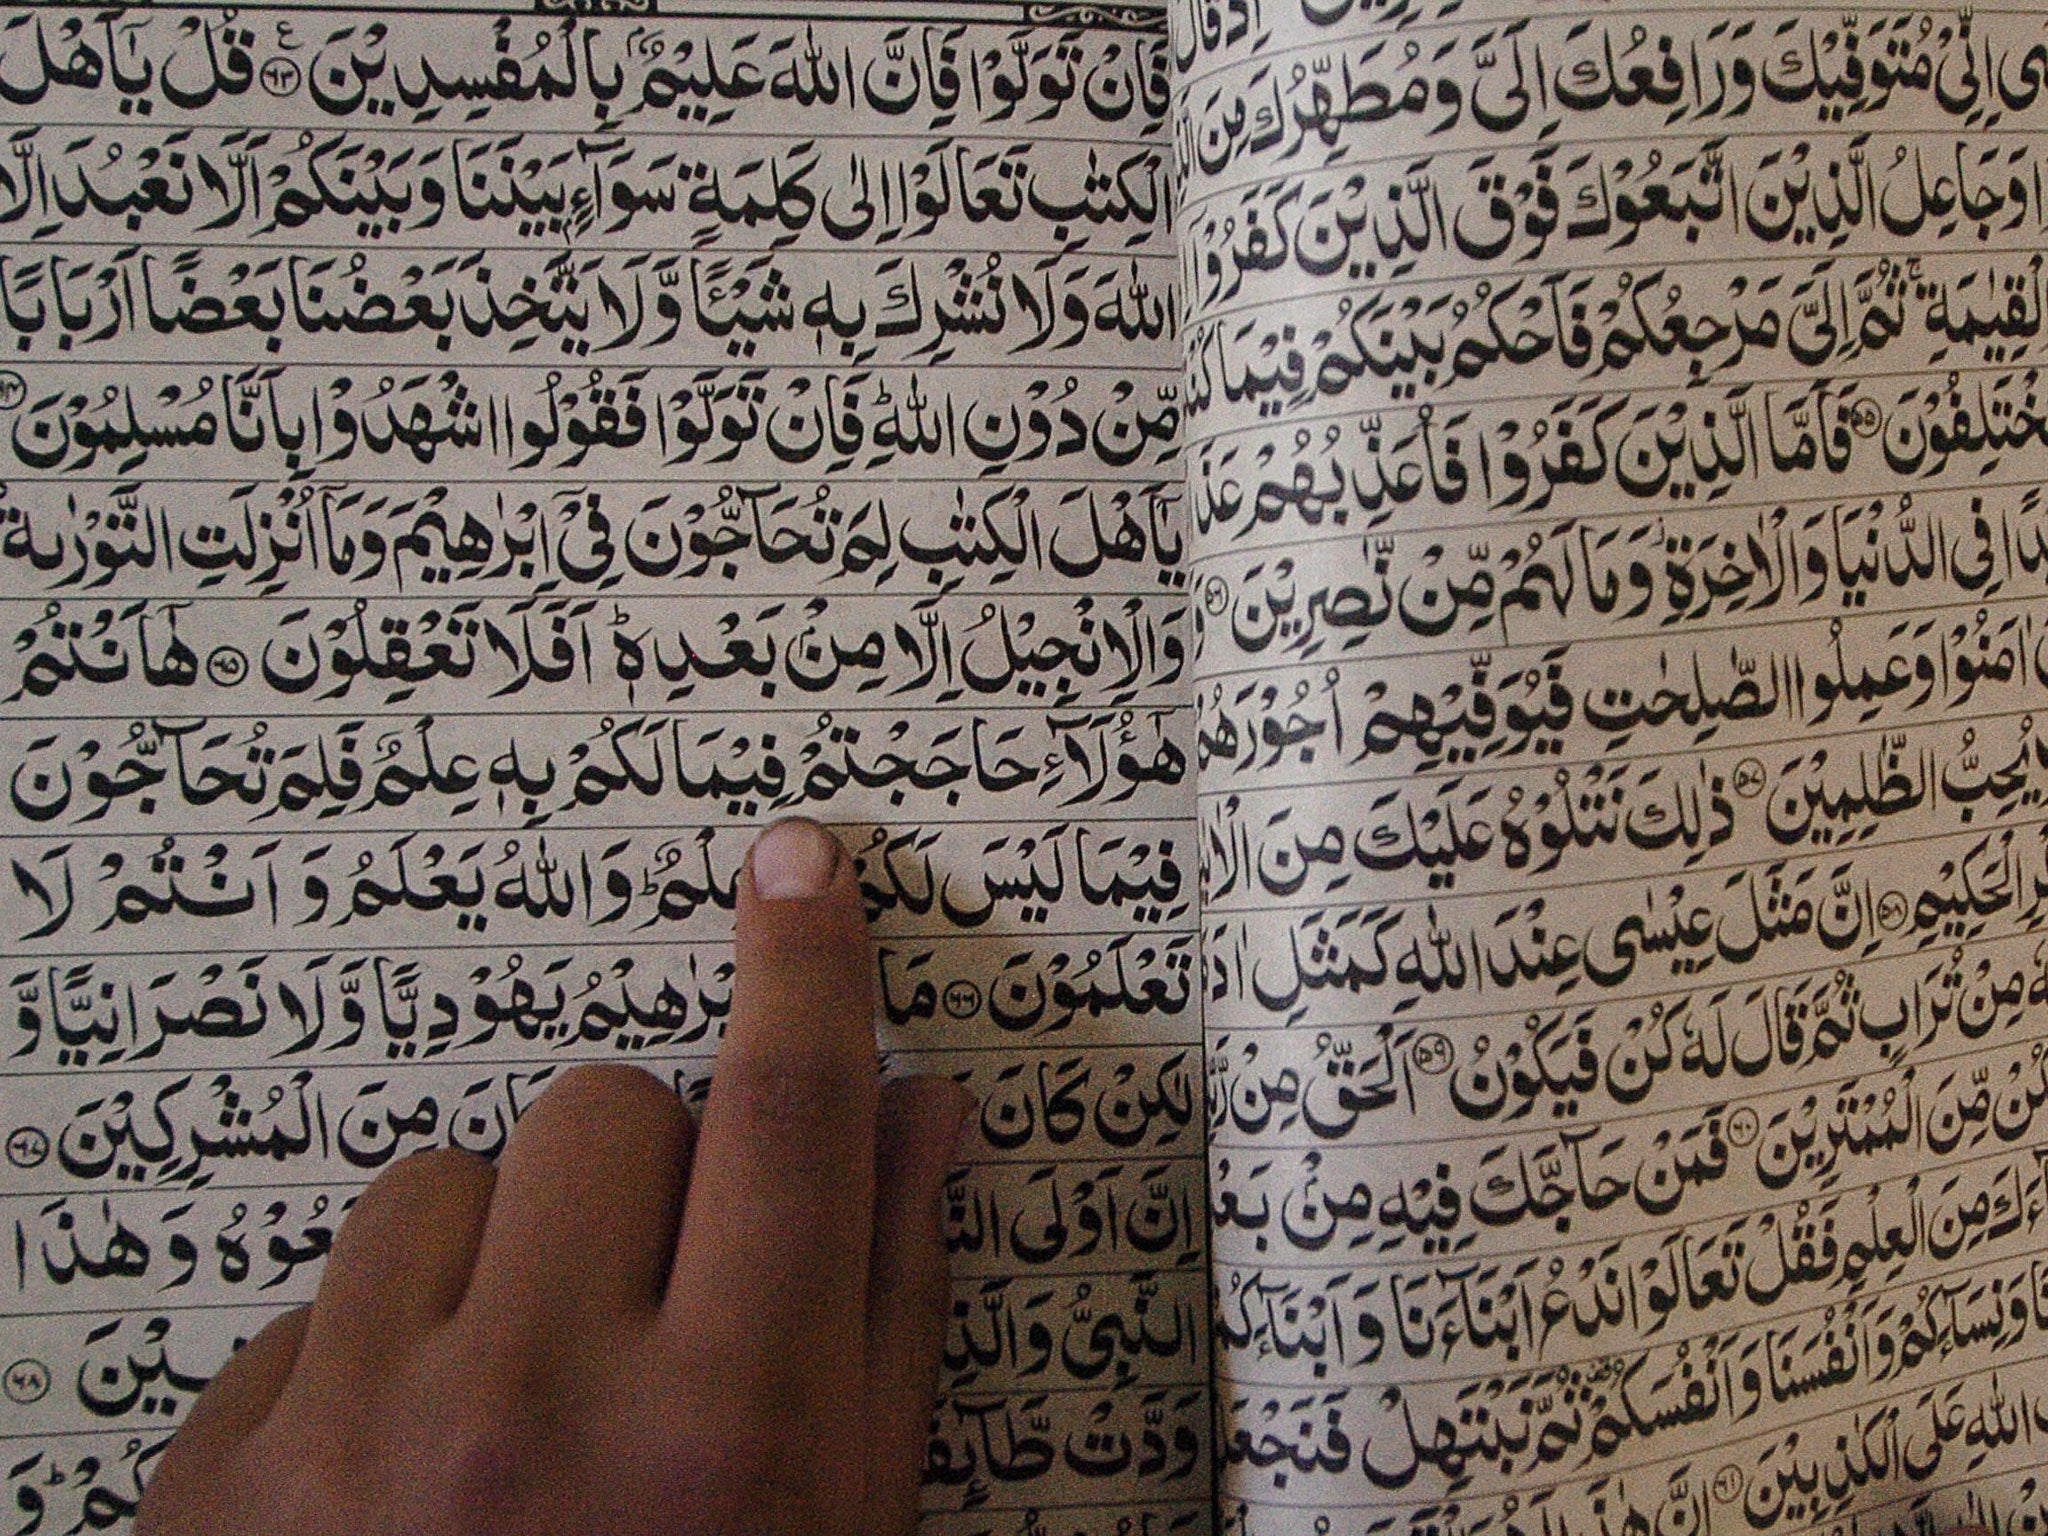 Several editions of the Islamic Holy Book were found in a toilet